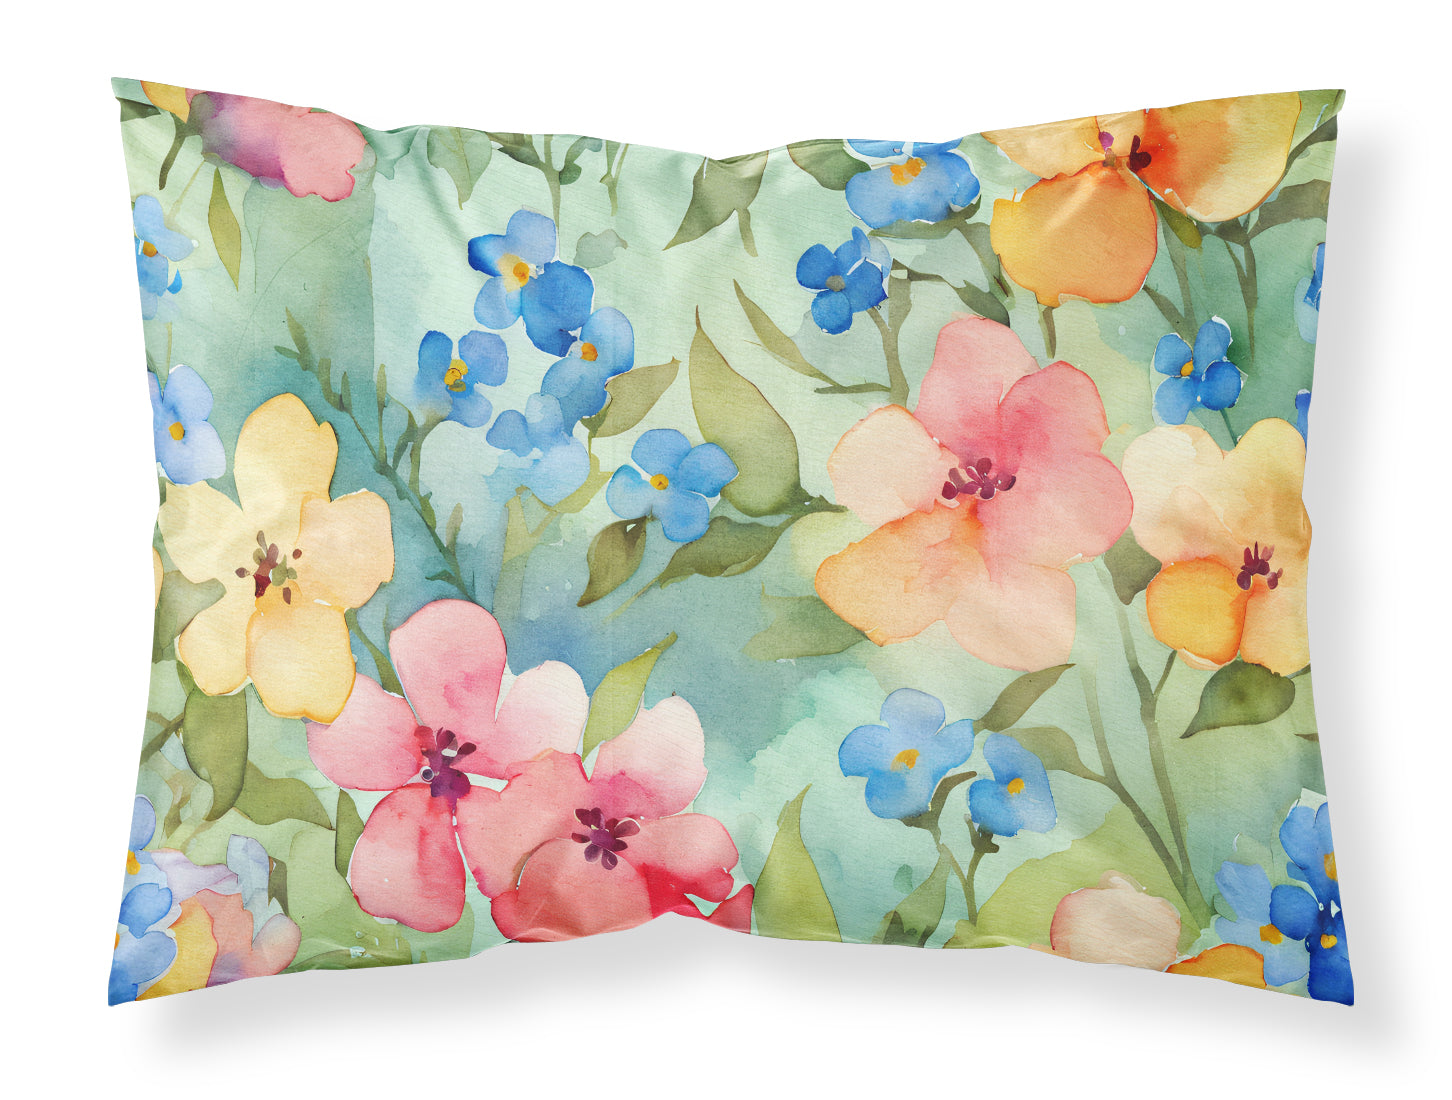 Buy this Alaska Forget-me-nots in Watercolor Fabric Standard Pillowcase